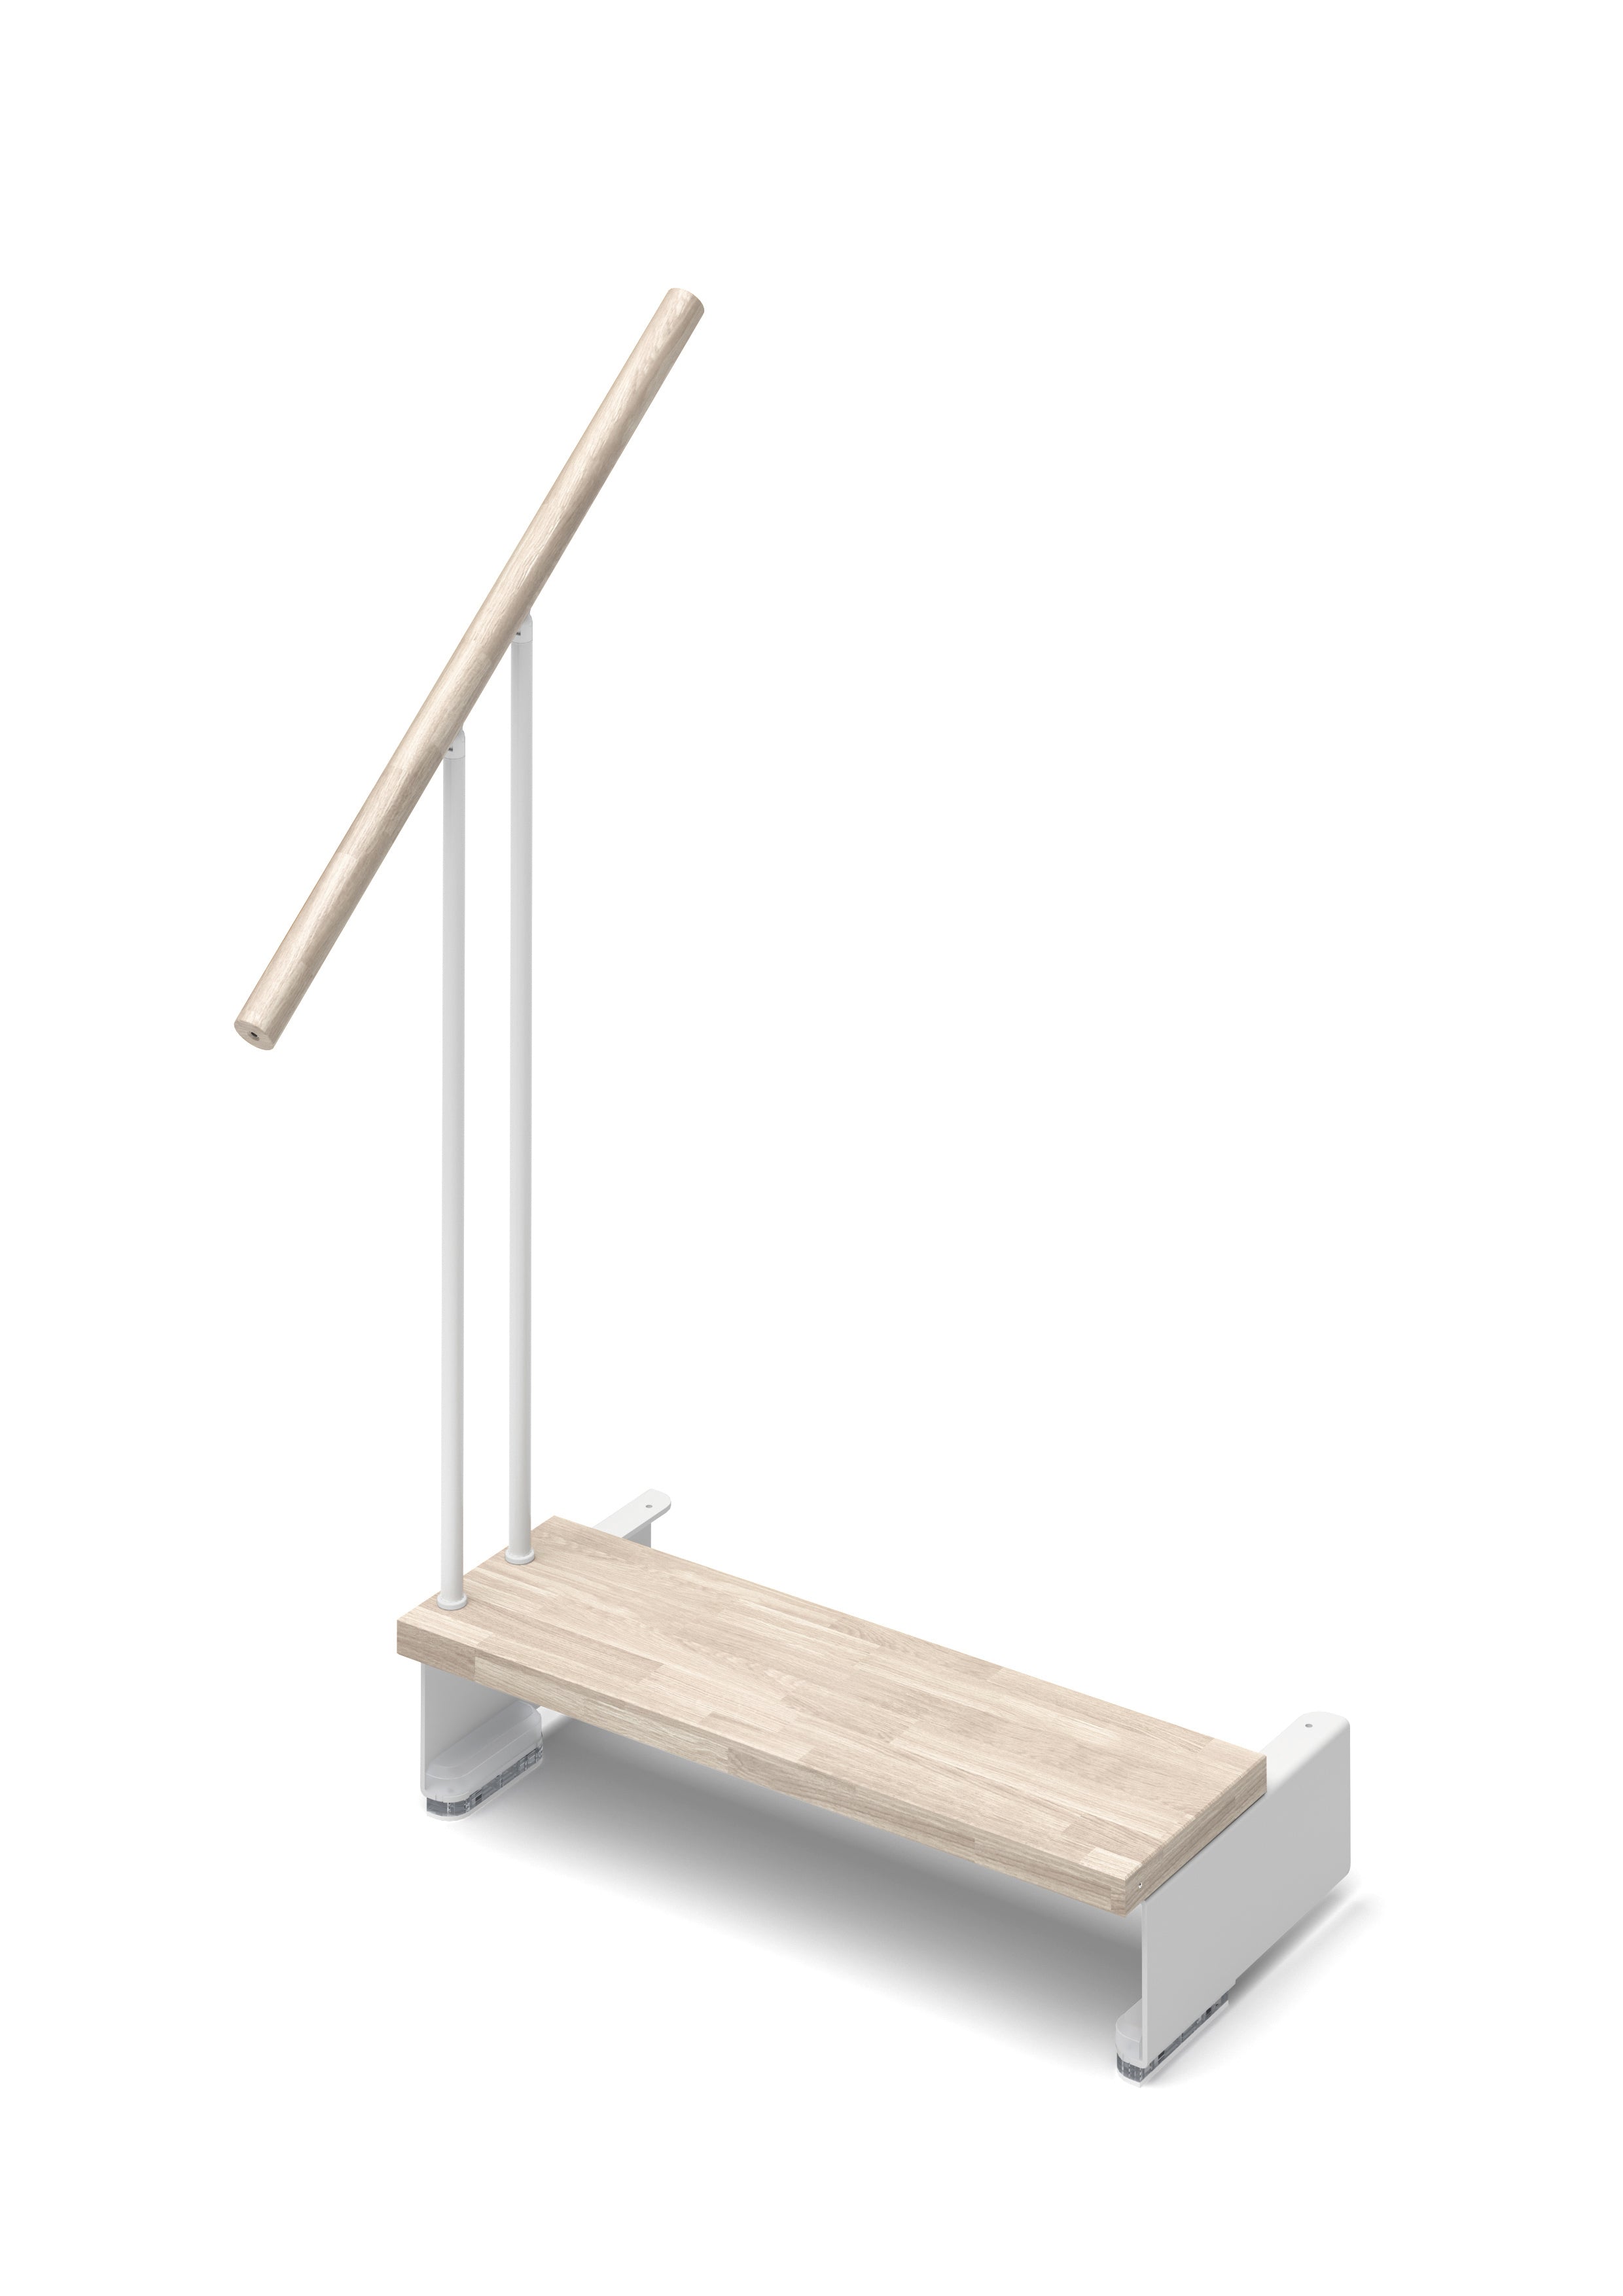 Additional step Adapta 84cm (with structure and railing) - Whitened 84